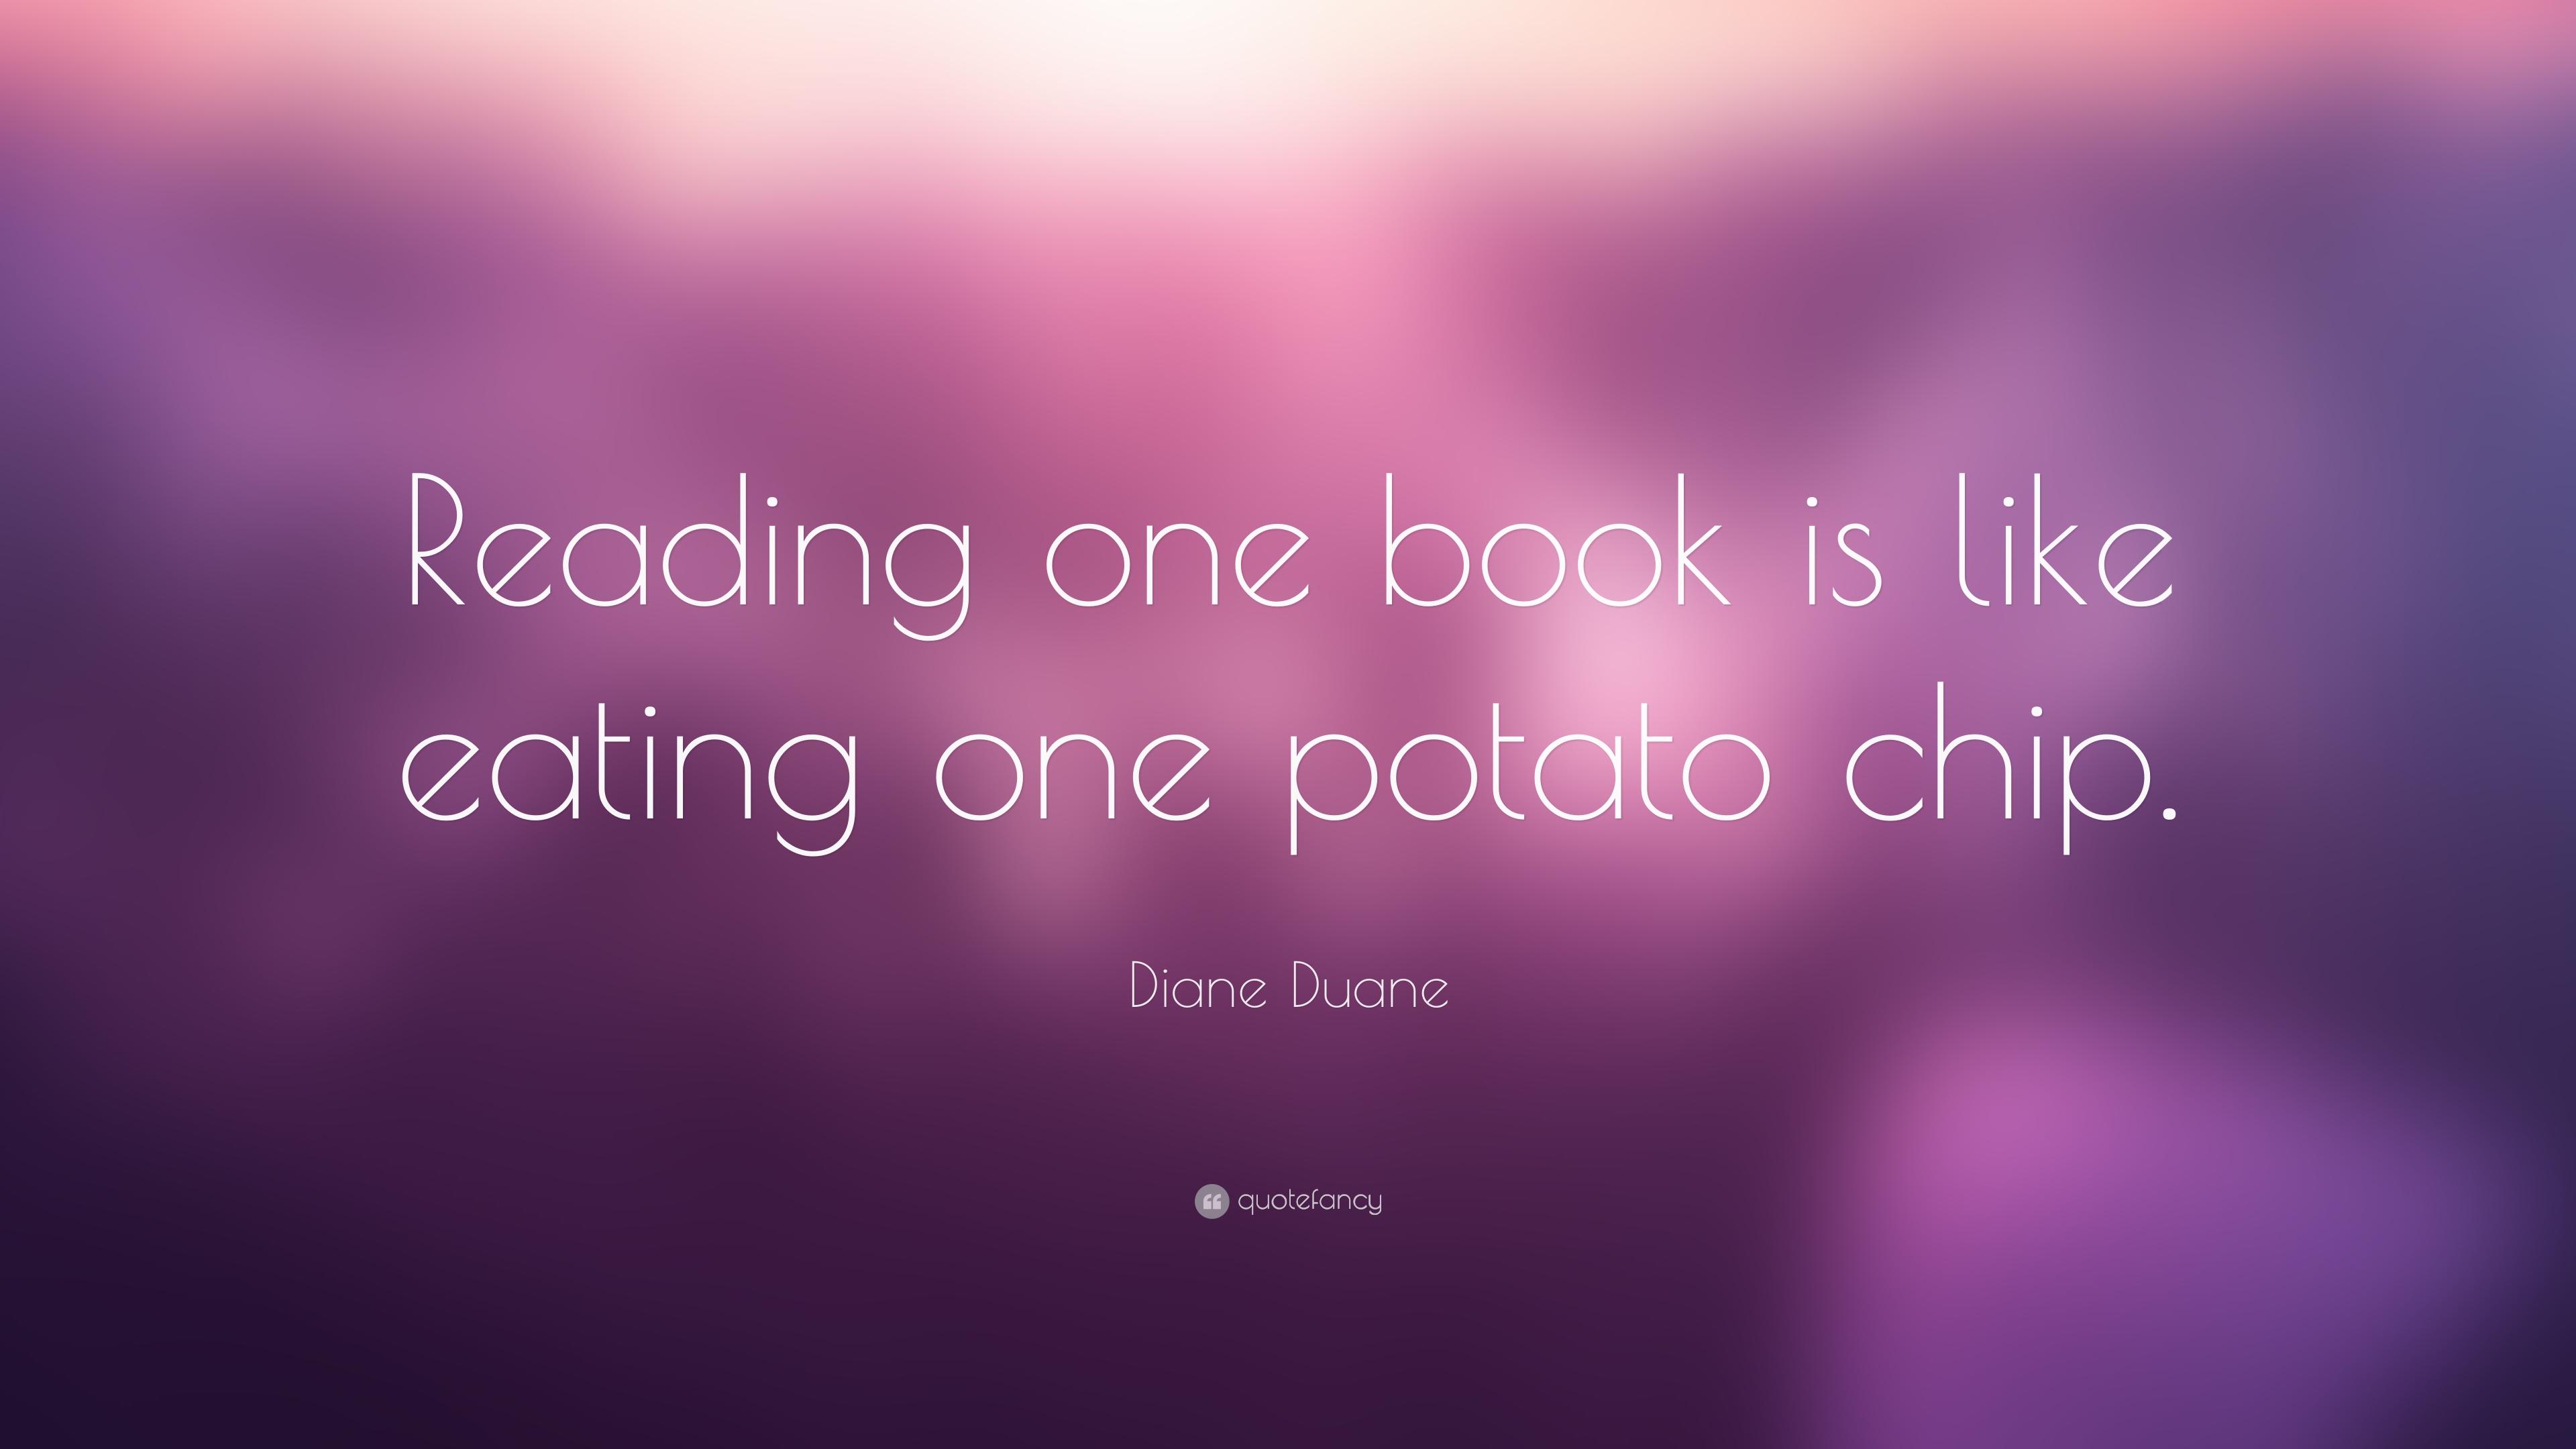 Quotes About Books And Reading (22 wallpaper)